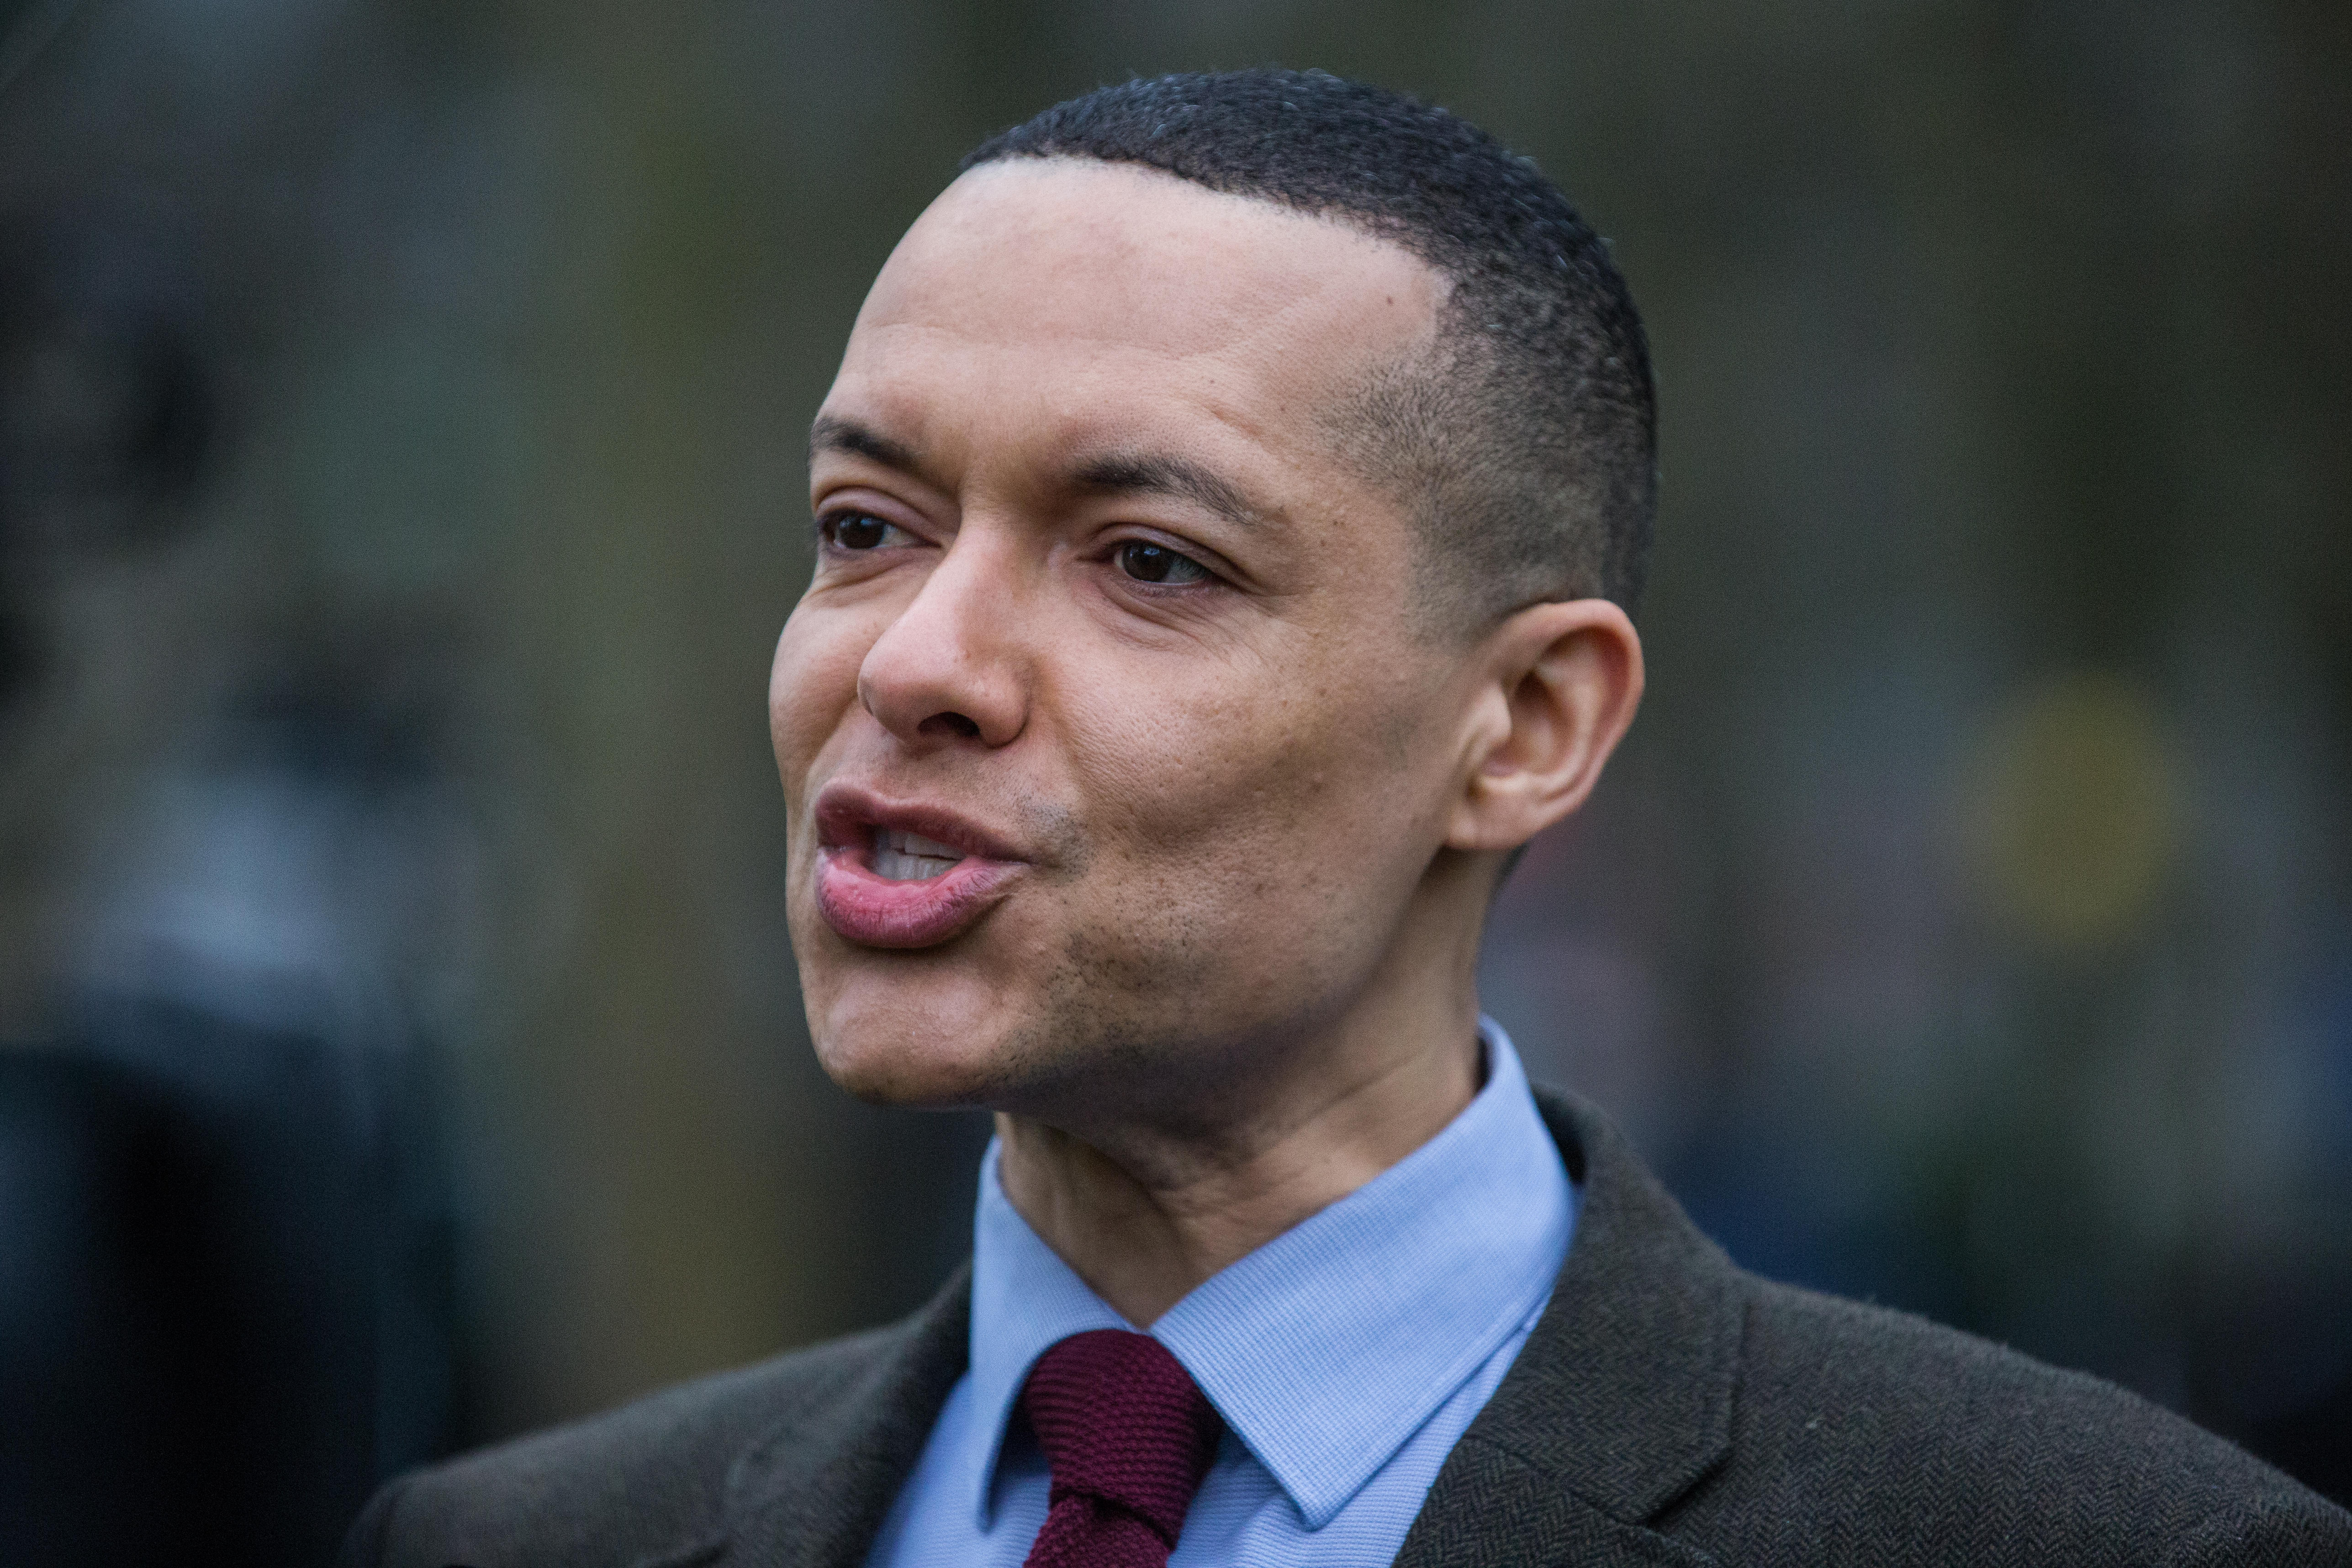 Claims that the British countryside is racist and colonial have been blasted as nonsense, above Labour MP Clive Lewis